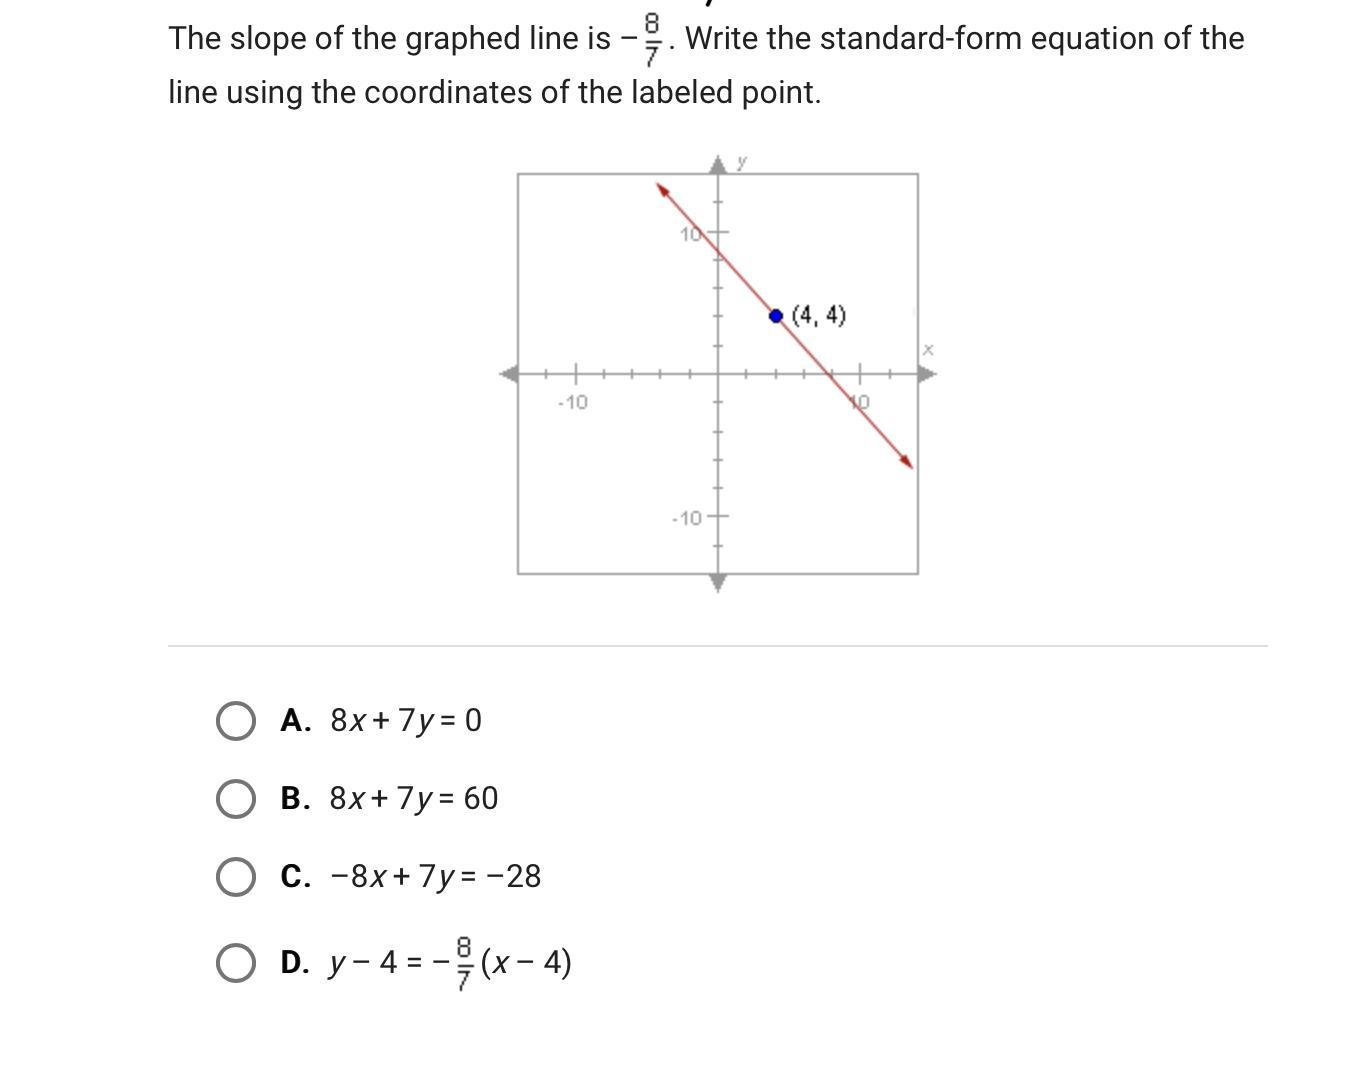 The Slope Of A Graphed Line Is -8/7. Write The Standard-form Equation Of The Line Using The Coordinates